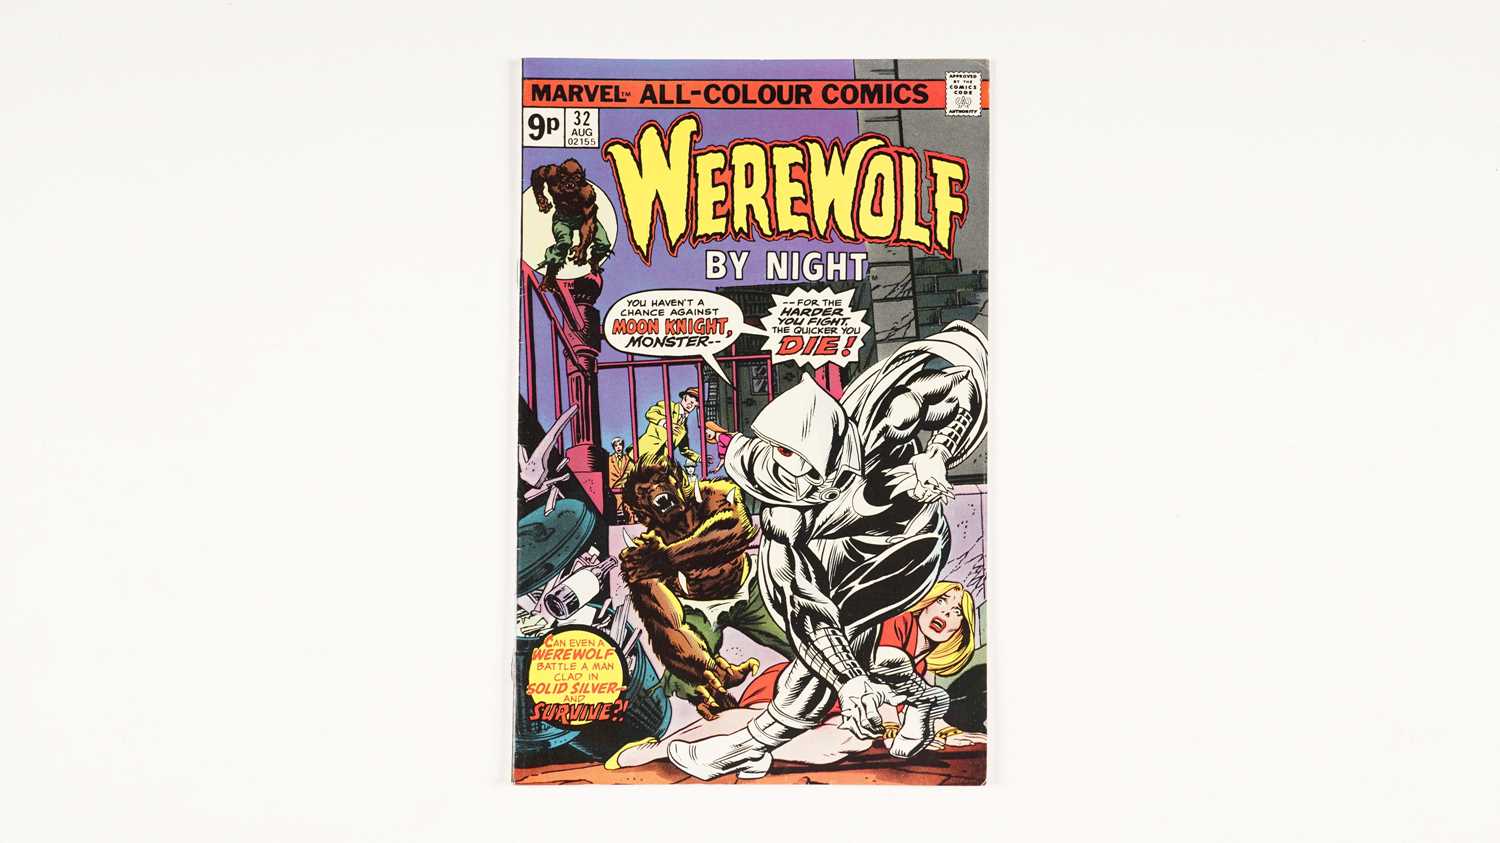 Lot 37 - Werewolf By Night by Marvel Comics